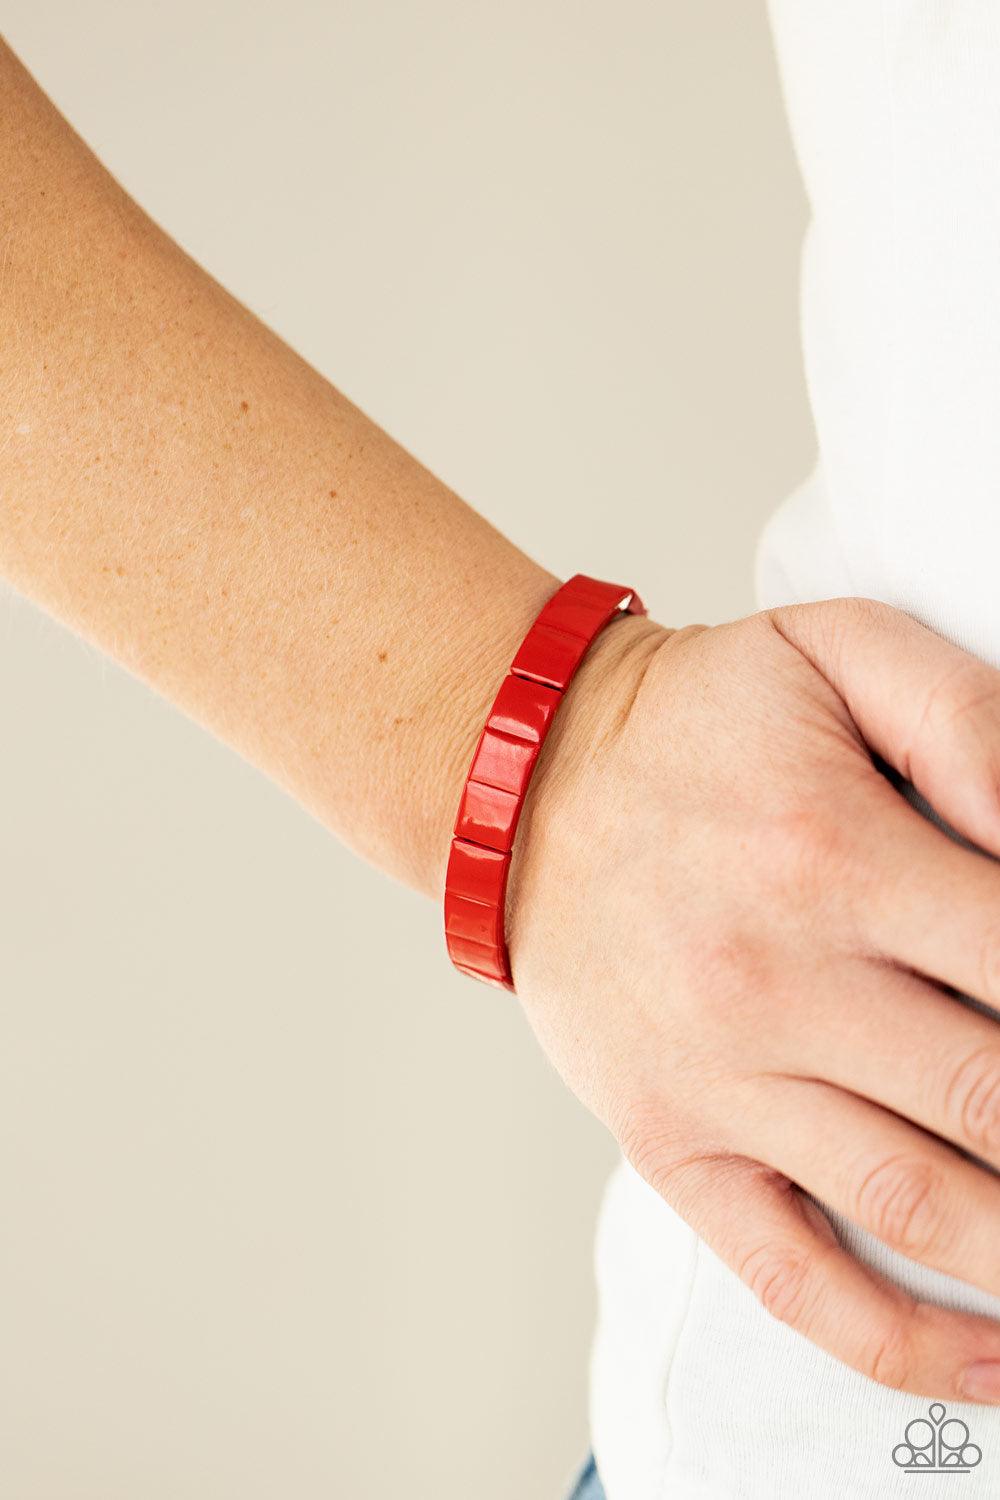 Paparazzi Accessories Material Movement - Red Metal rectangles painted in a fiery red finish are threaded along stretchy bands, forming a gorgeous pop of color that wraps around the wrist. Sold as one individual bracelet. Jewelry